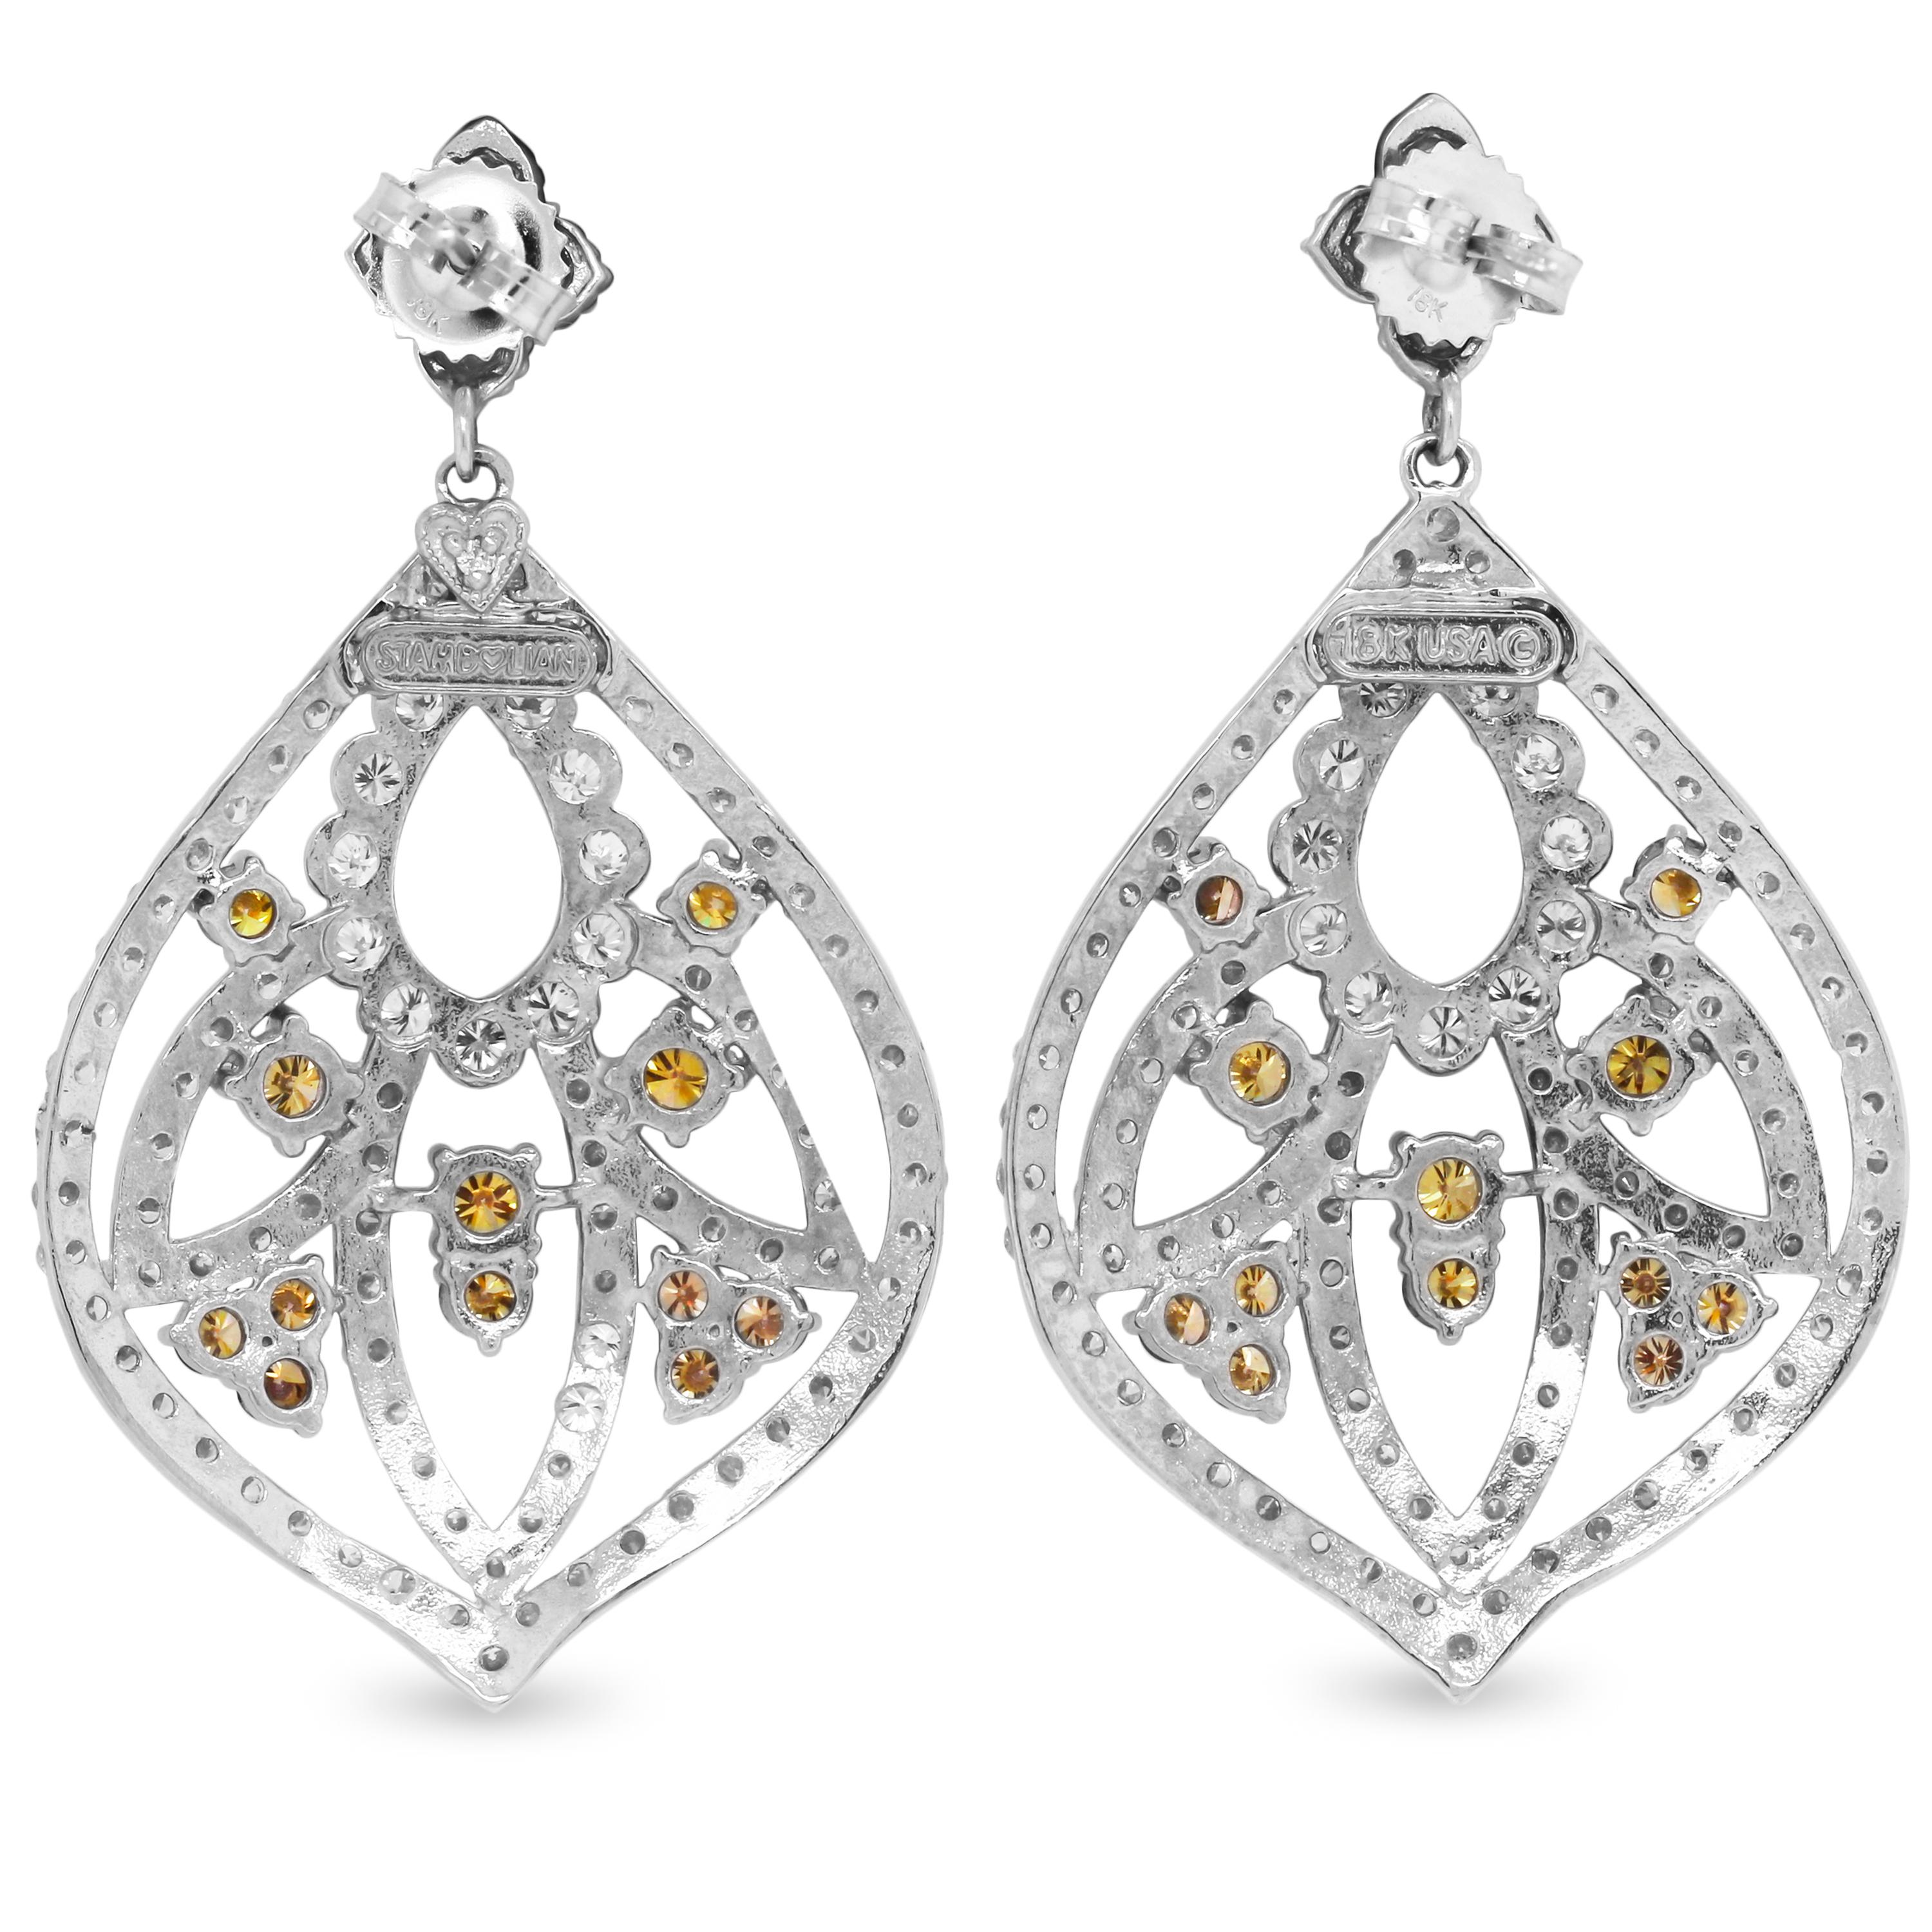 Stambolian Canary Yellow and White Diamond 18K White Gold Chandelier Earrings 

These are from the Stambolian 